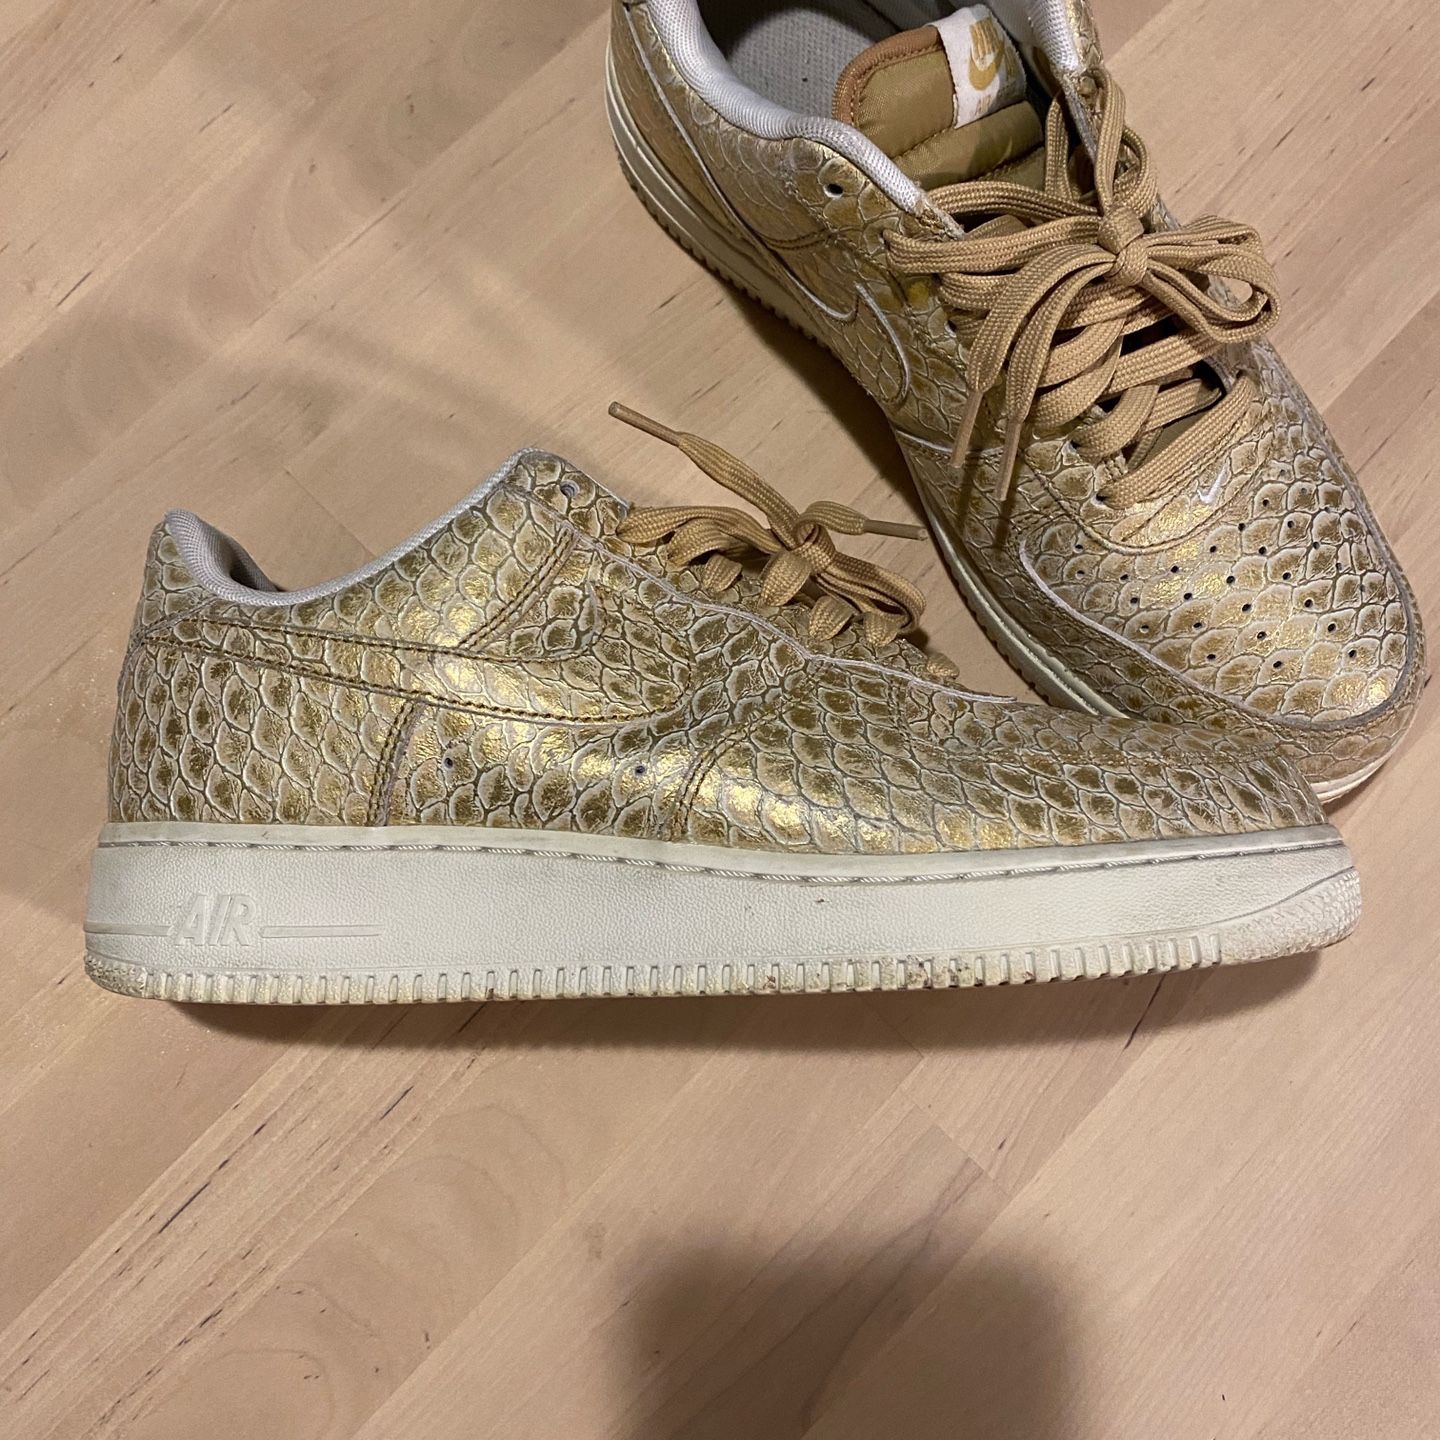 Nike Air Force 1 low “golden scales”